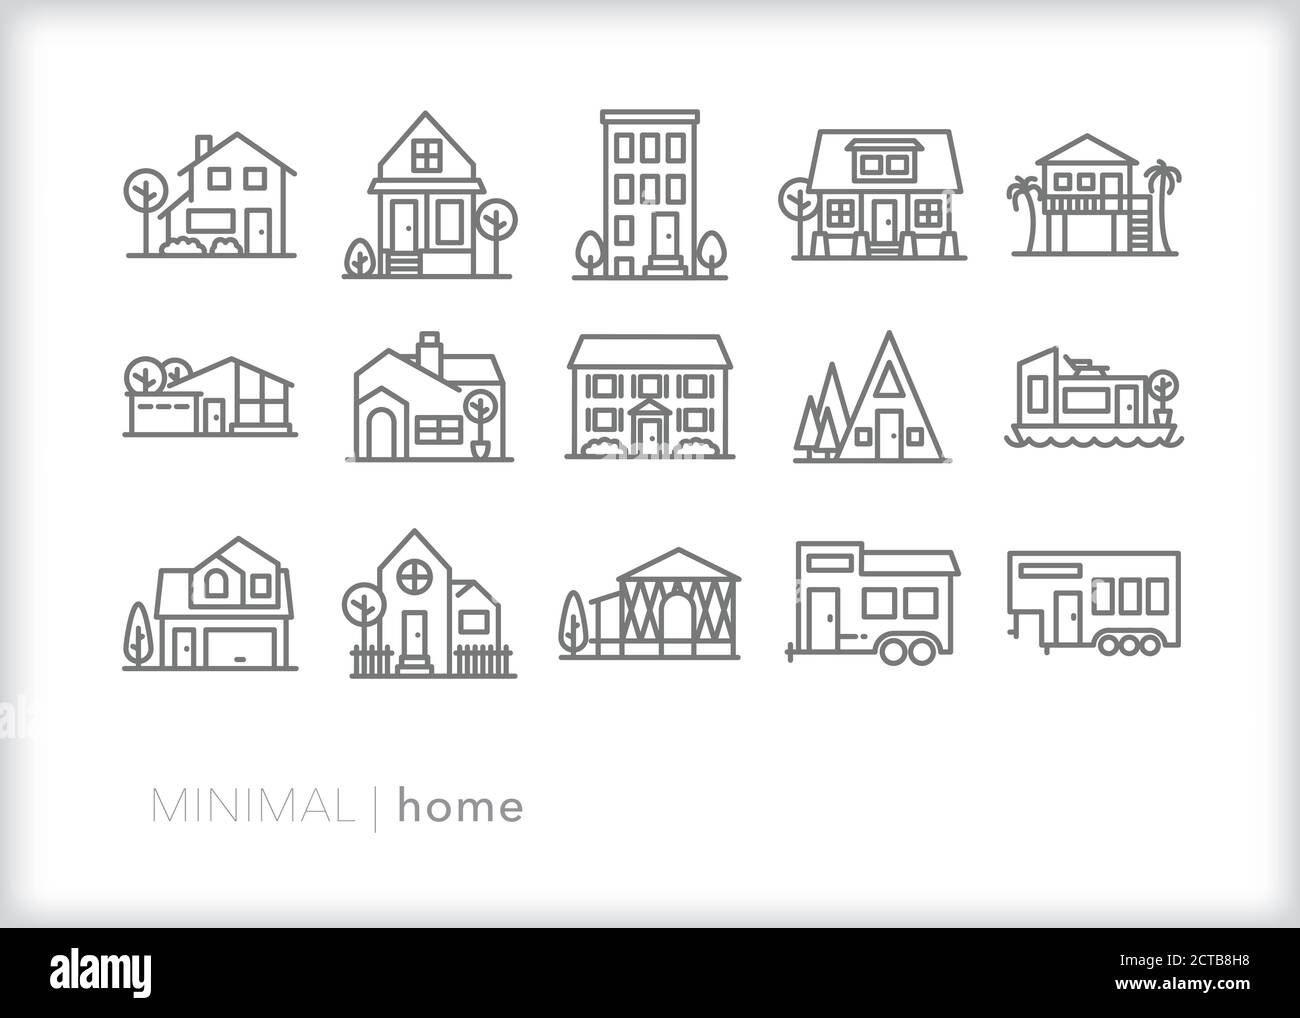 Set of house line icons of different architecture types of single family homes Stock Vector